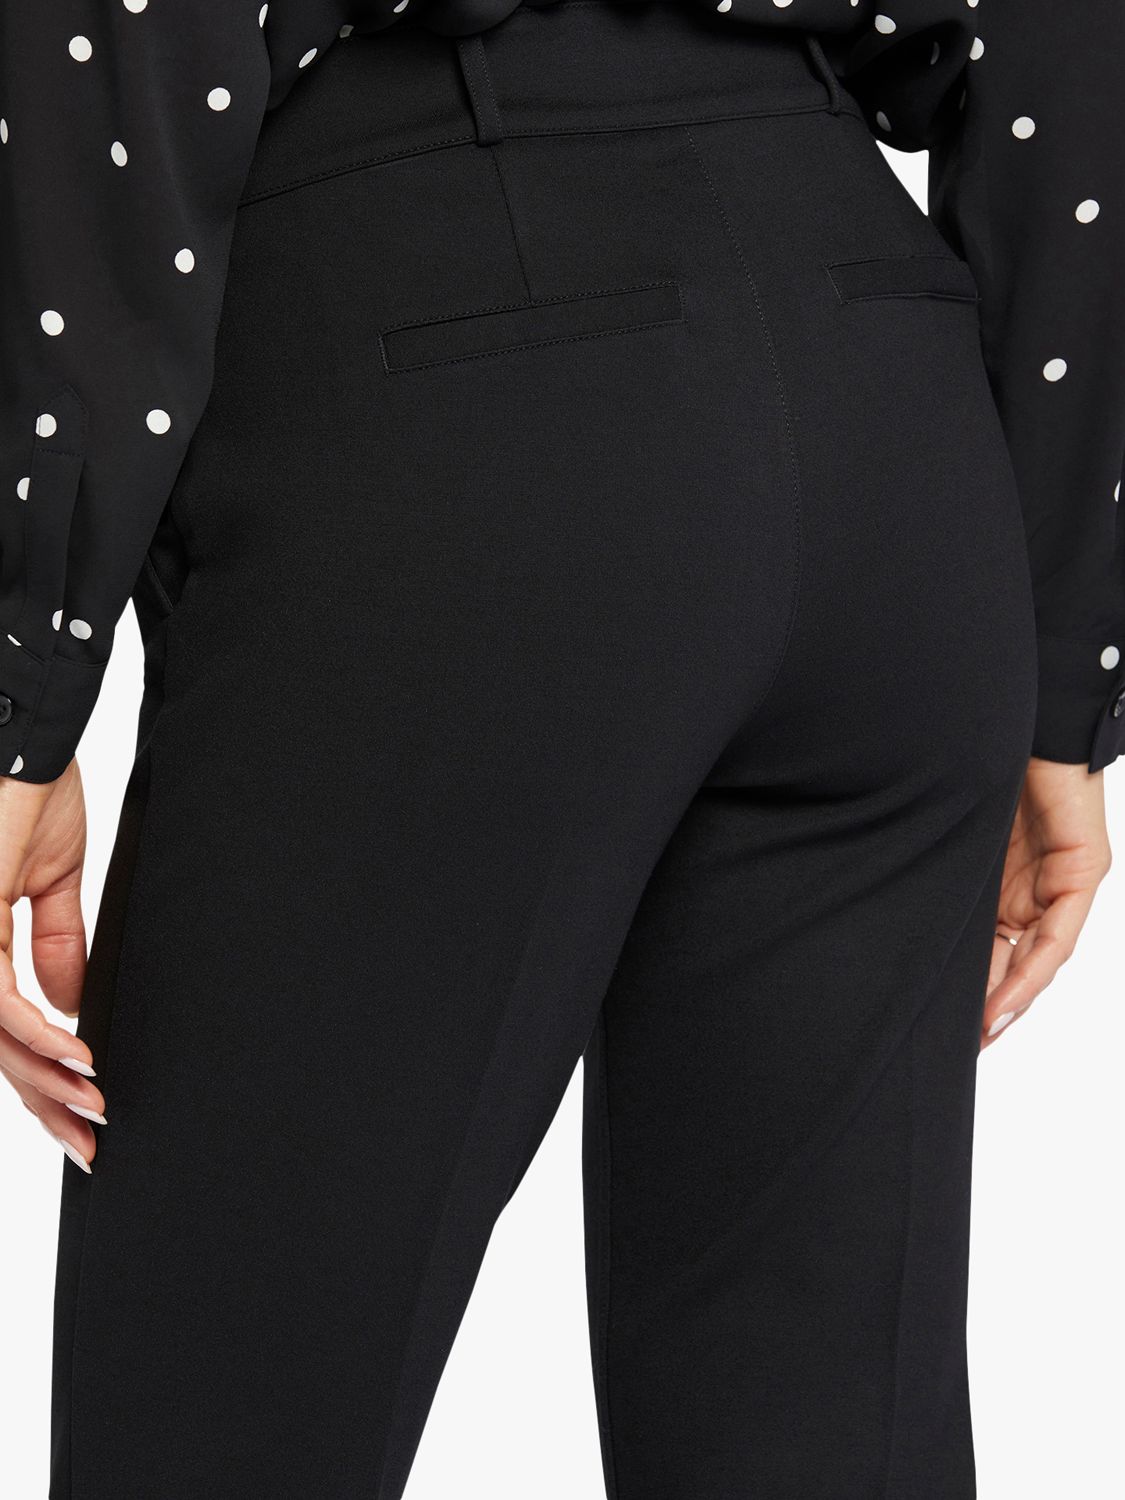 NYDJ Sculpt Her Classic Straight Trousers, Black at John Lewis & Partners